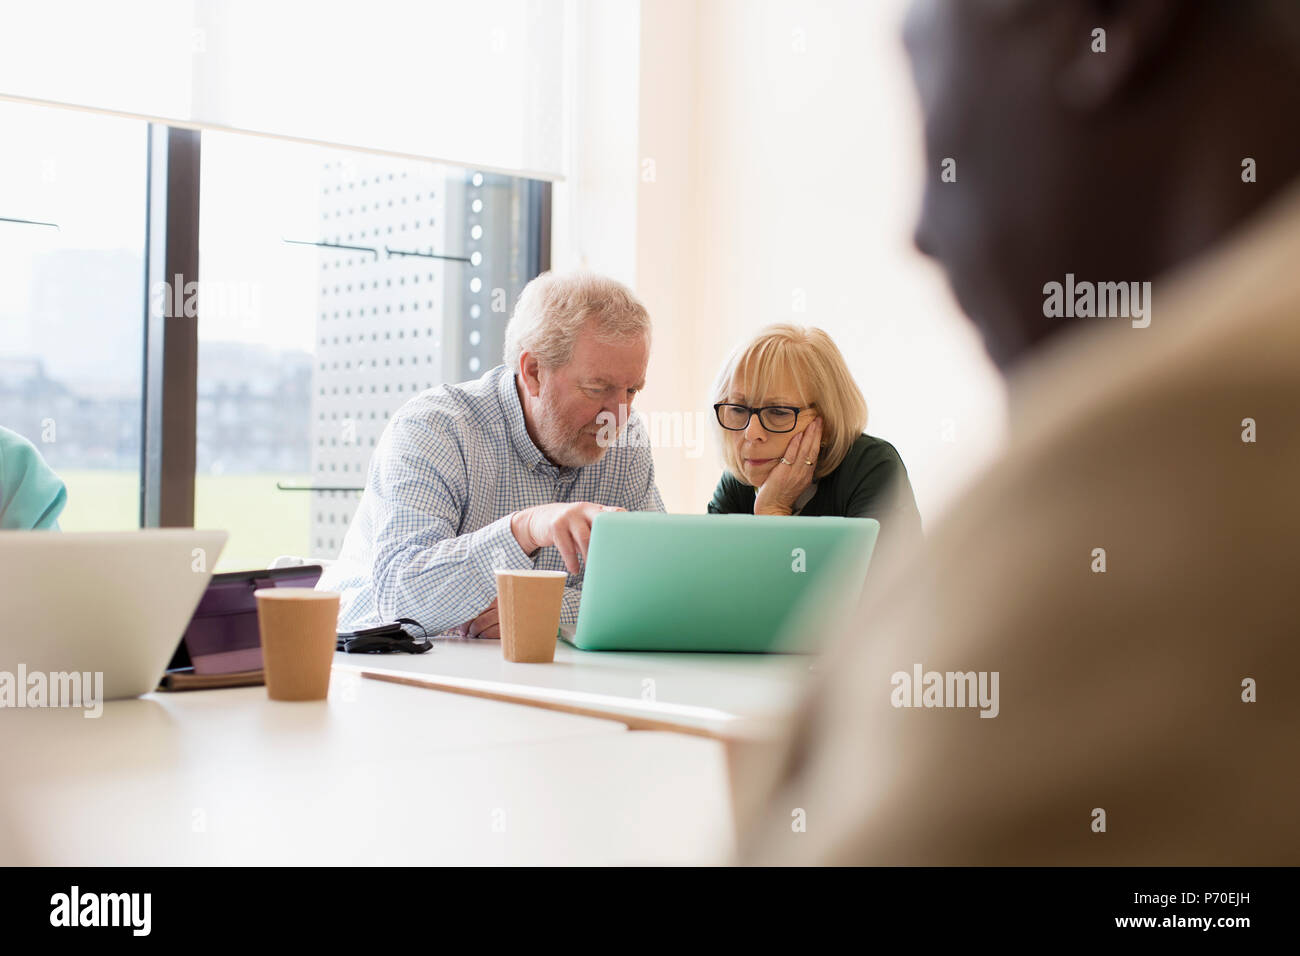 Senior business people using laptop in conference room meeting Stock Photo